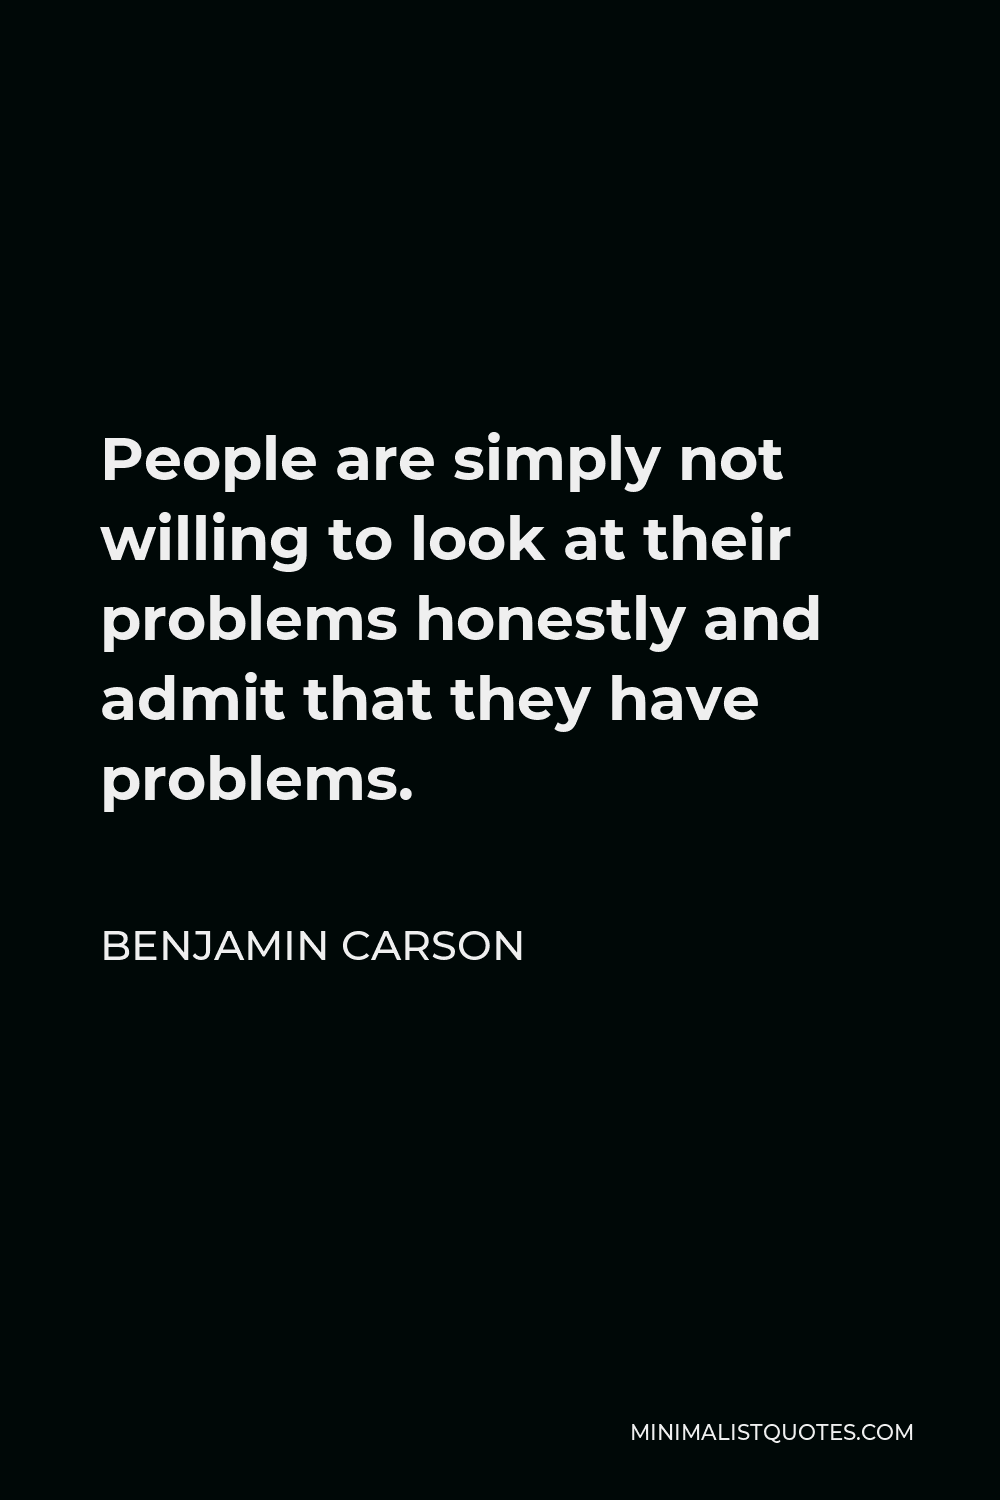 Benjamin Carson Quote - People are simply not willing to look at their problems honestly and admit that they have problems.